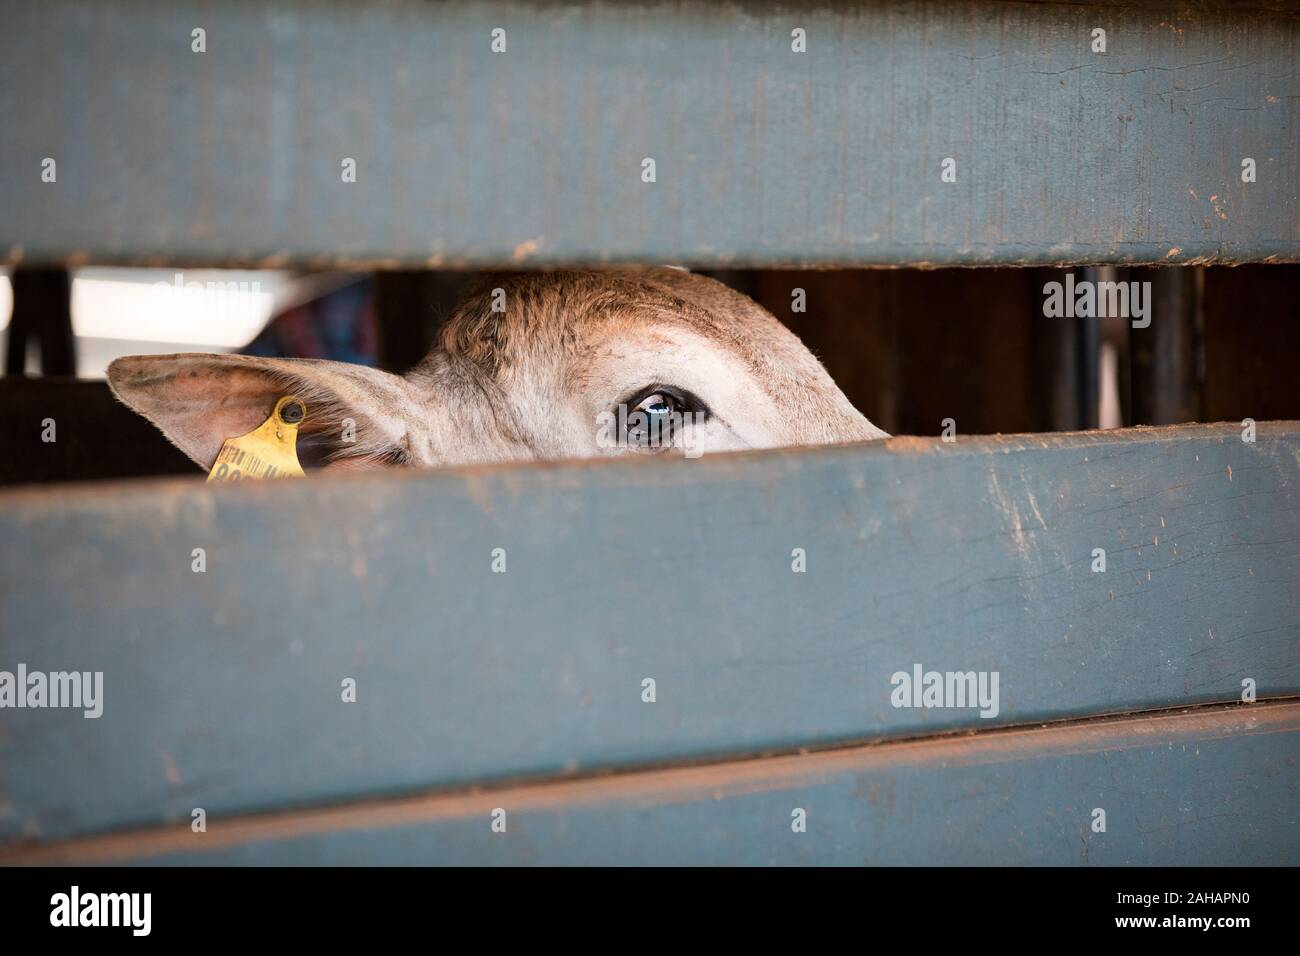 A cow, about to be branded - afraid Stock Photo